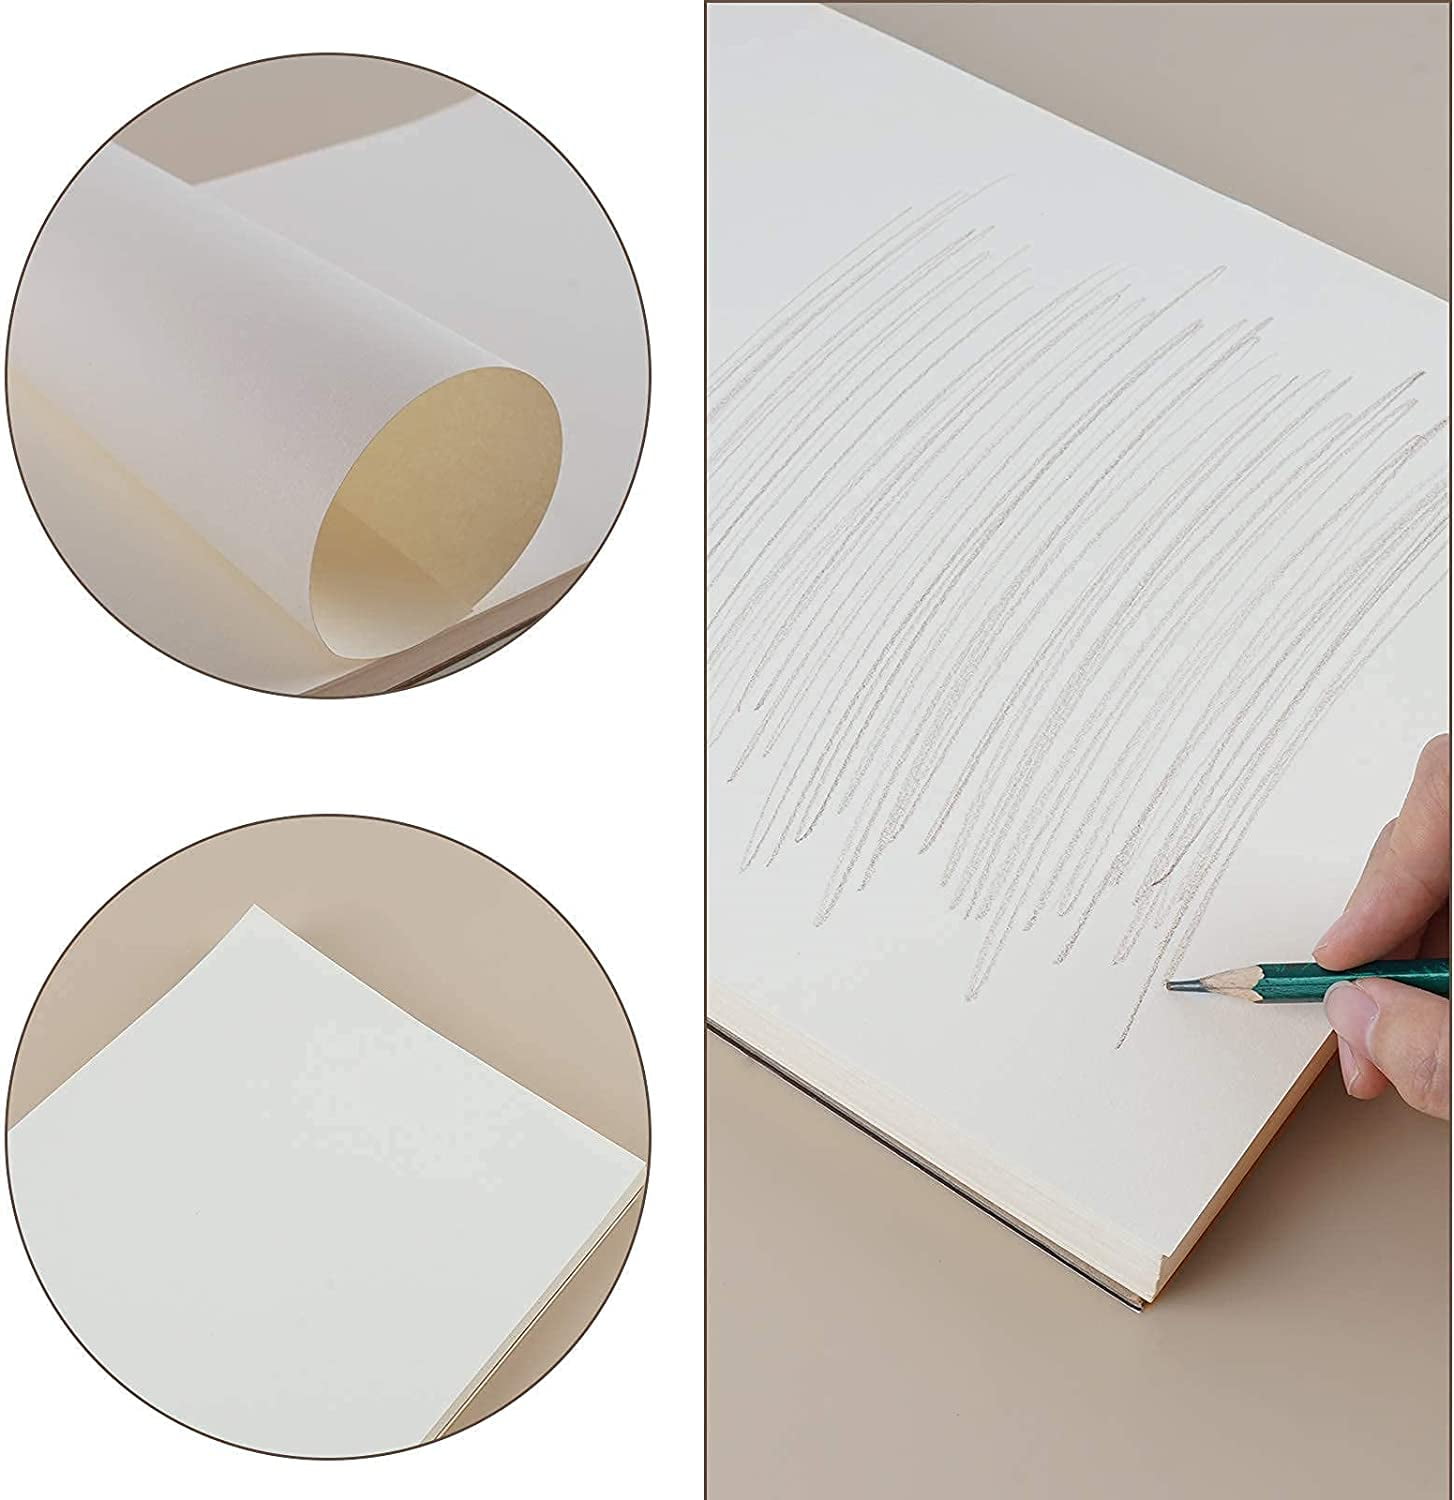 Emraw 9 x 12 Sketch Book Top Wire Bound Spiral, Acid Free Sketchbook  White Writing, Drawing & Sketching Sketch Pads for Kids Adults Beginners